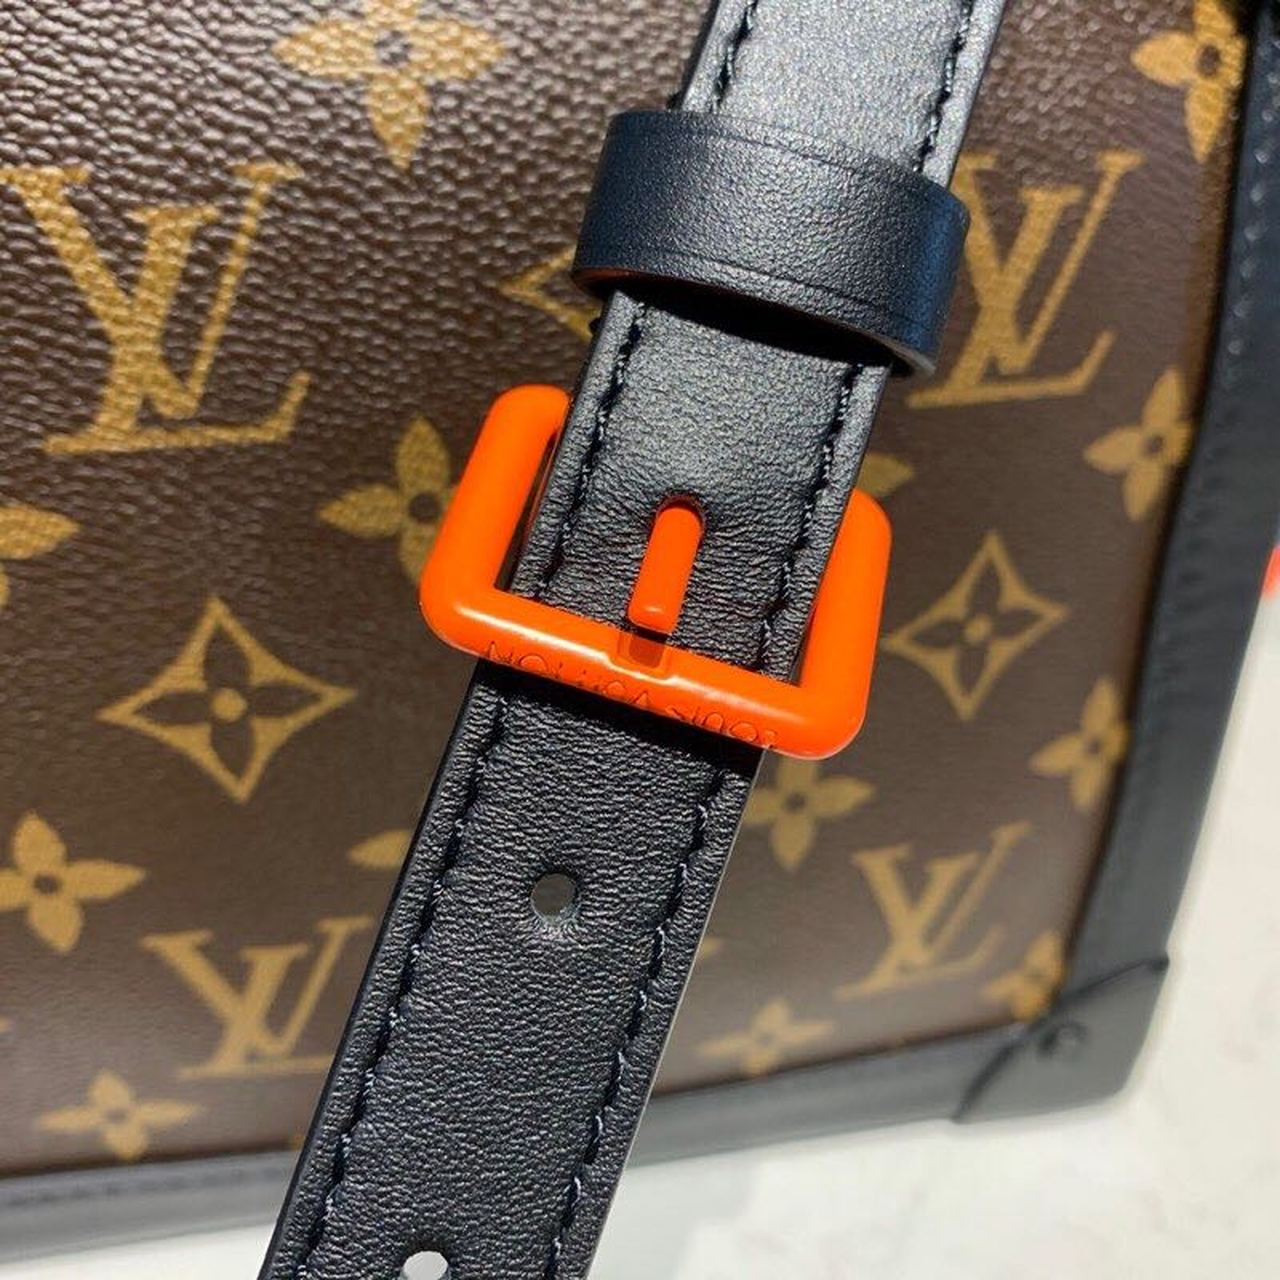 LV Soft Trunk Monogram Canvas For Men, Bags, Shoulder And Crossbody Bags 9.8in/25cm LV M44478